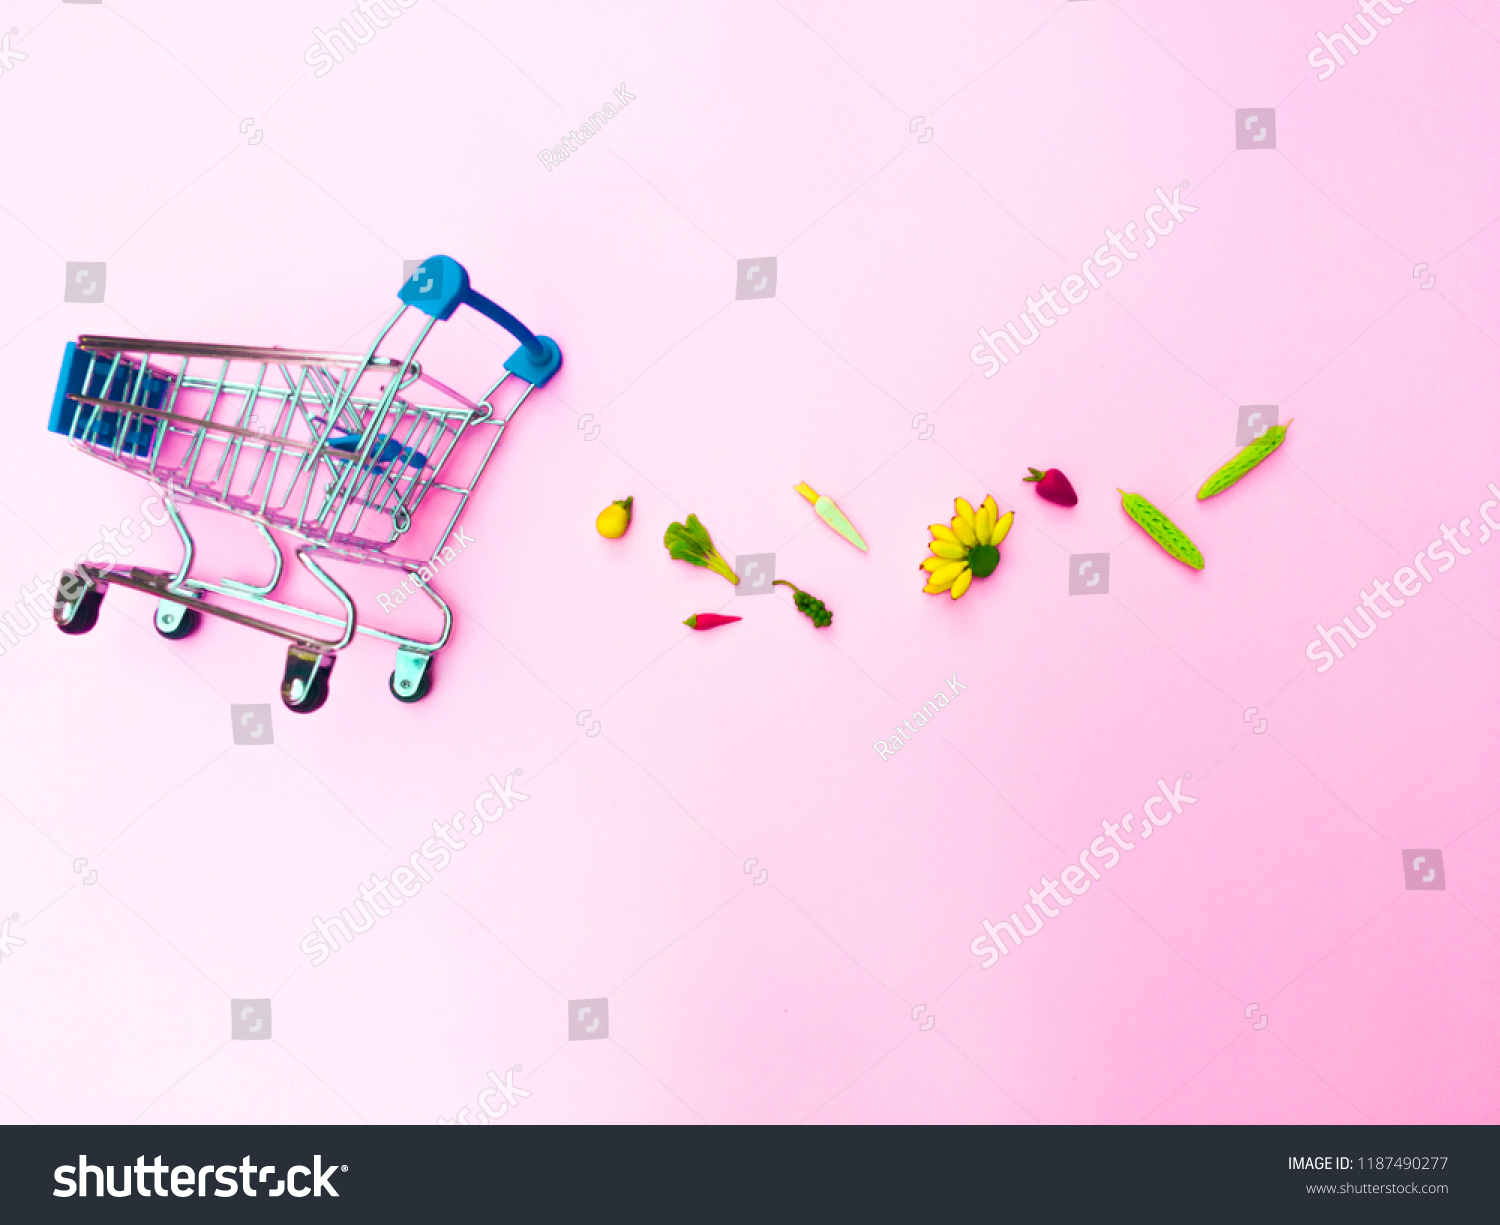 Ideas Online Shopping Pink Background Shopping Stock Photo Edit